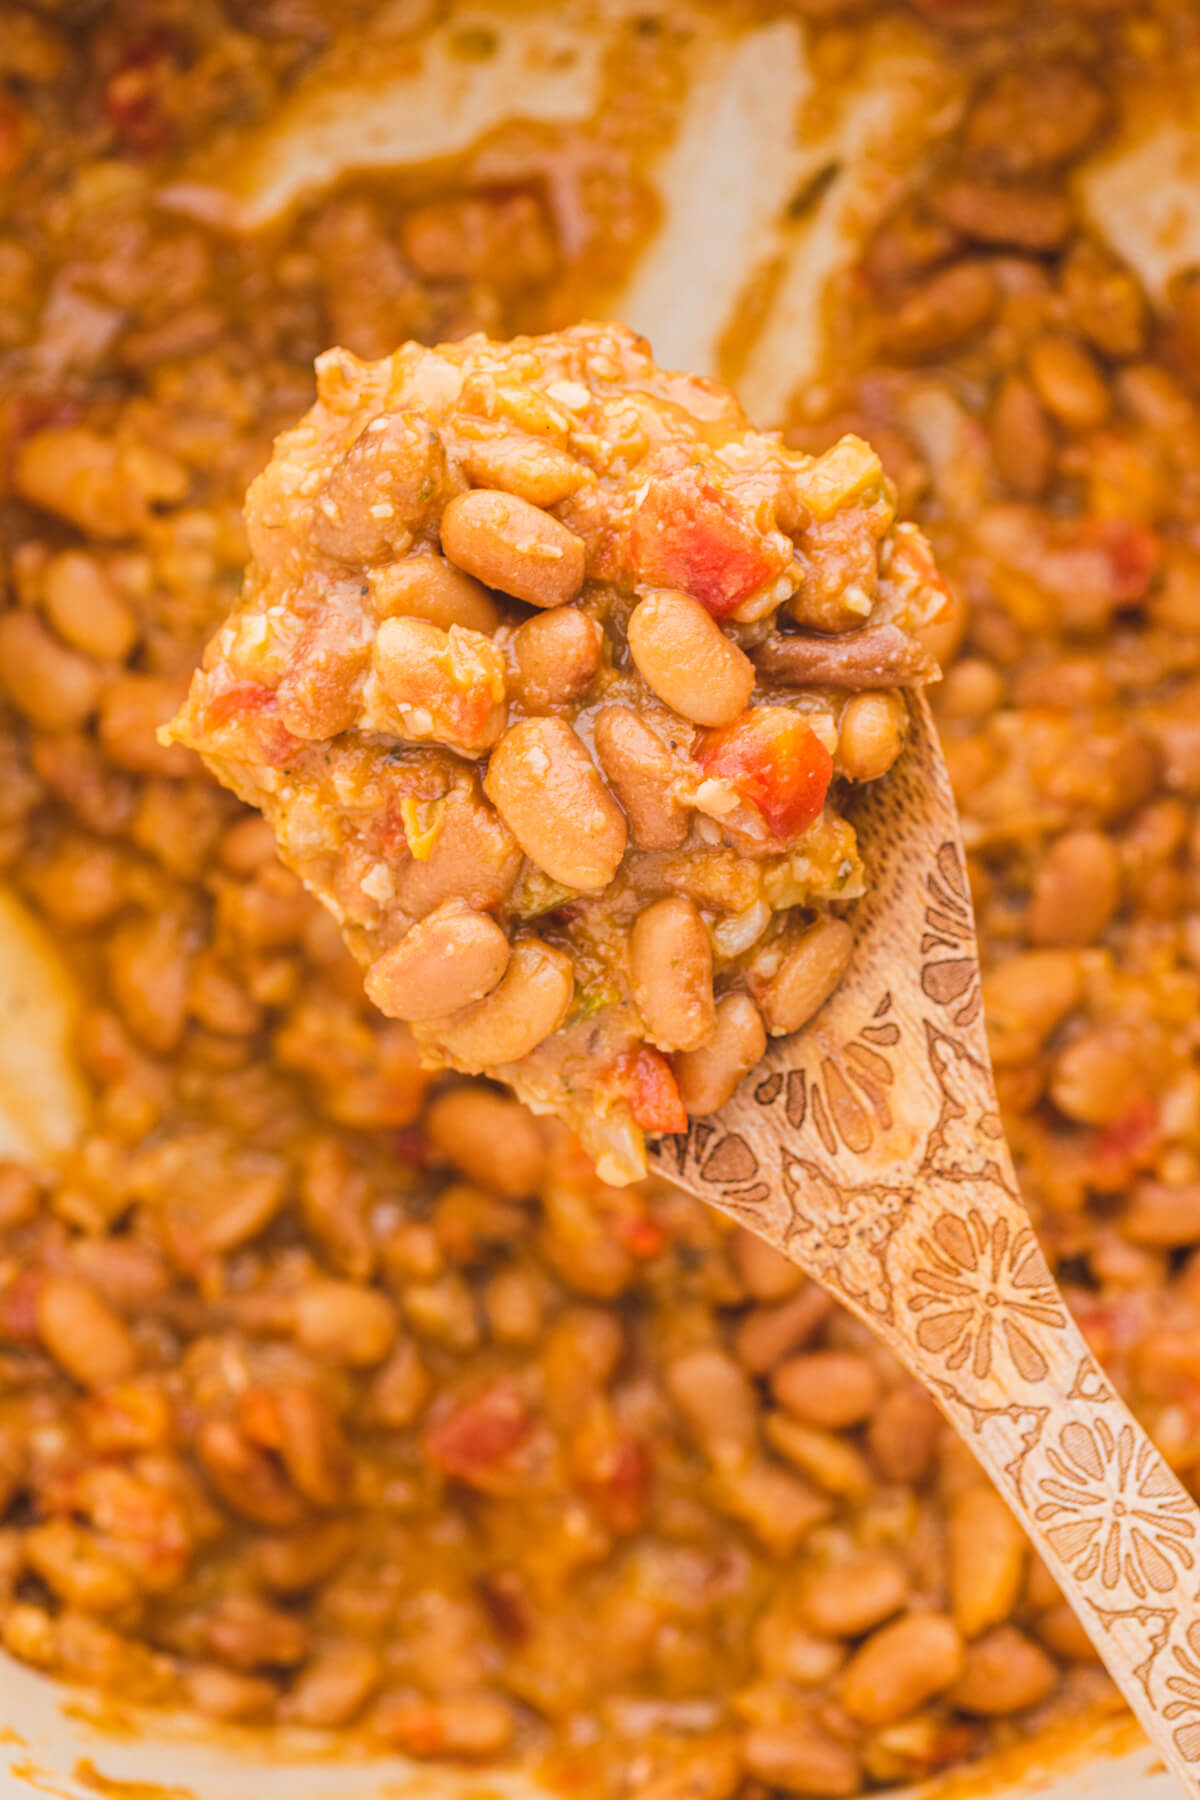 Cooked pinto beans on a wooden spoon.